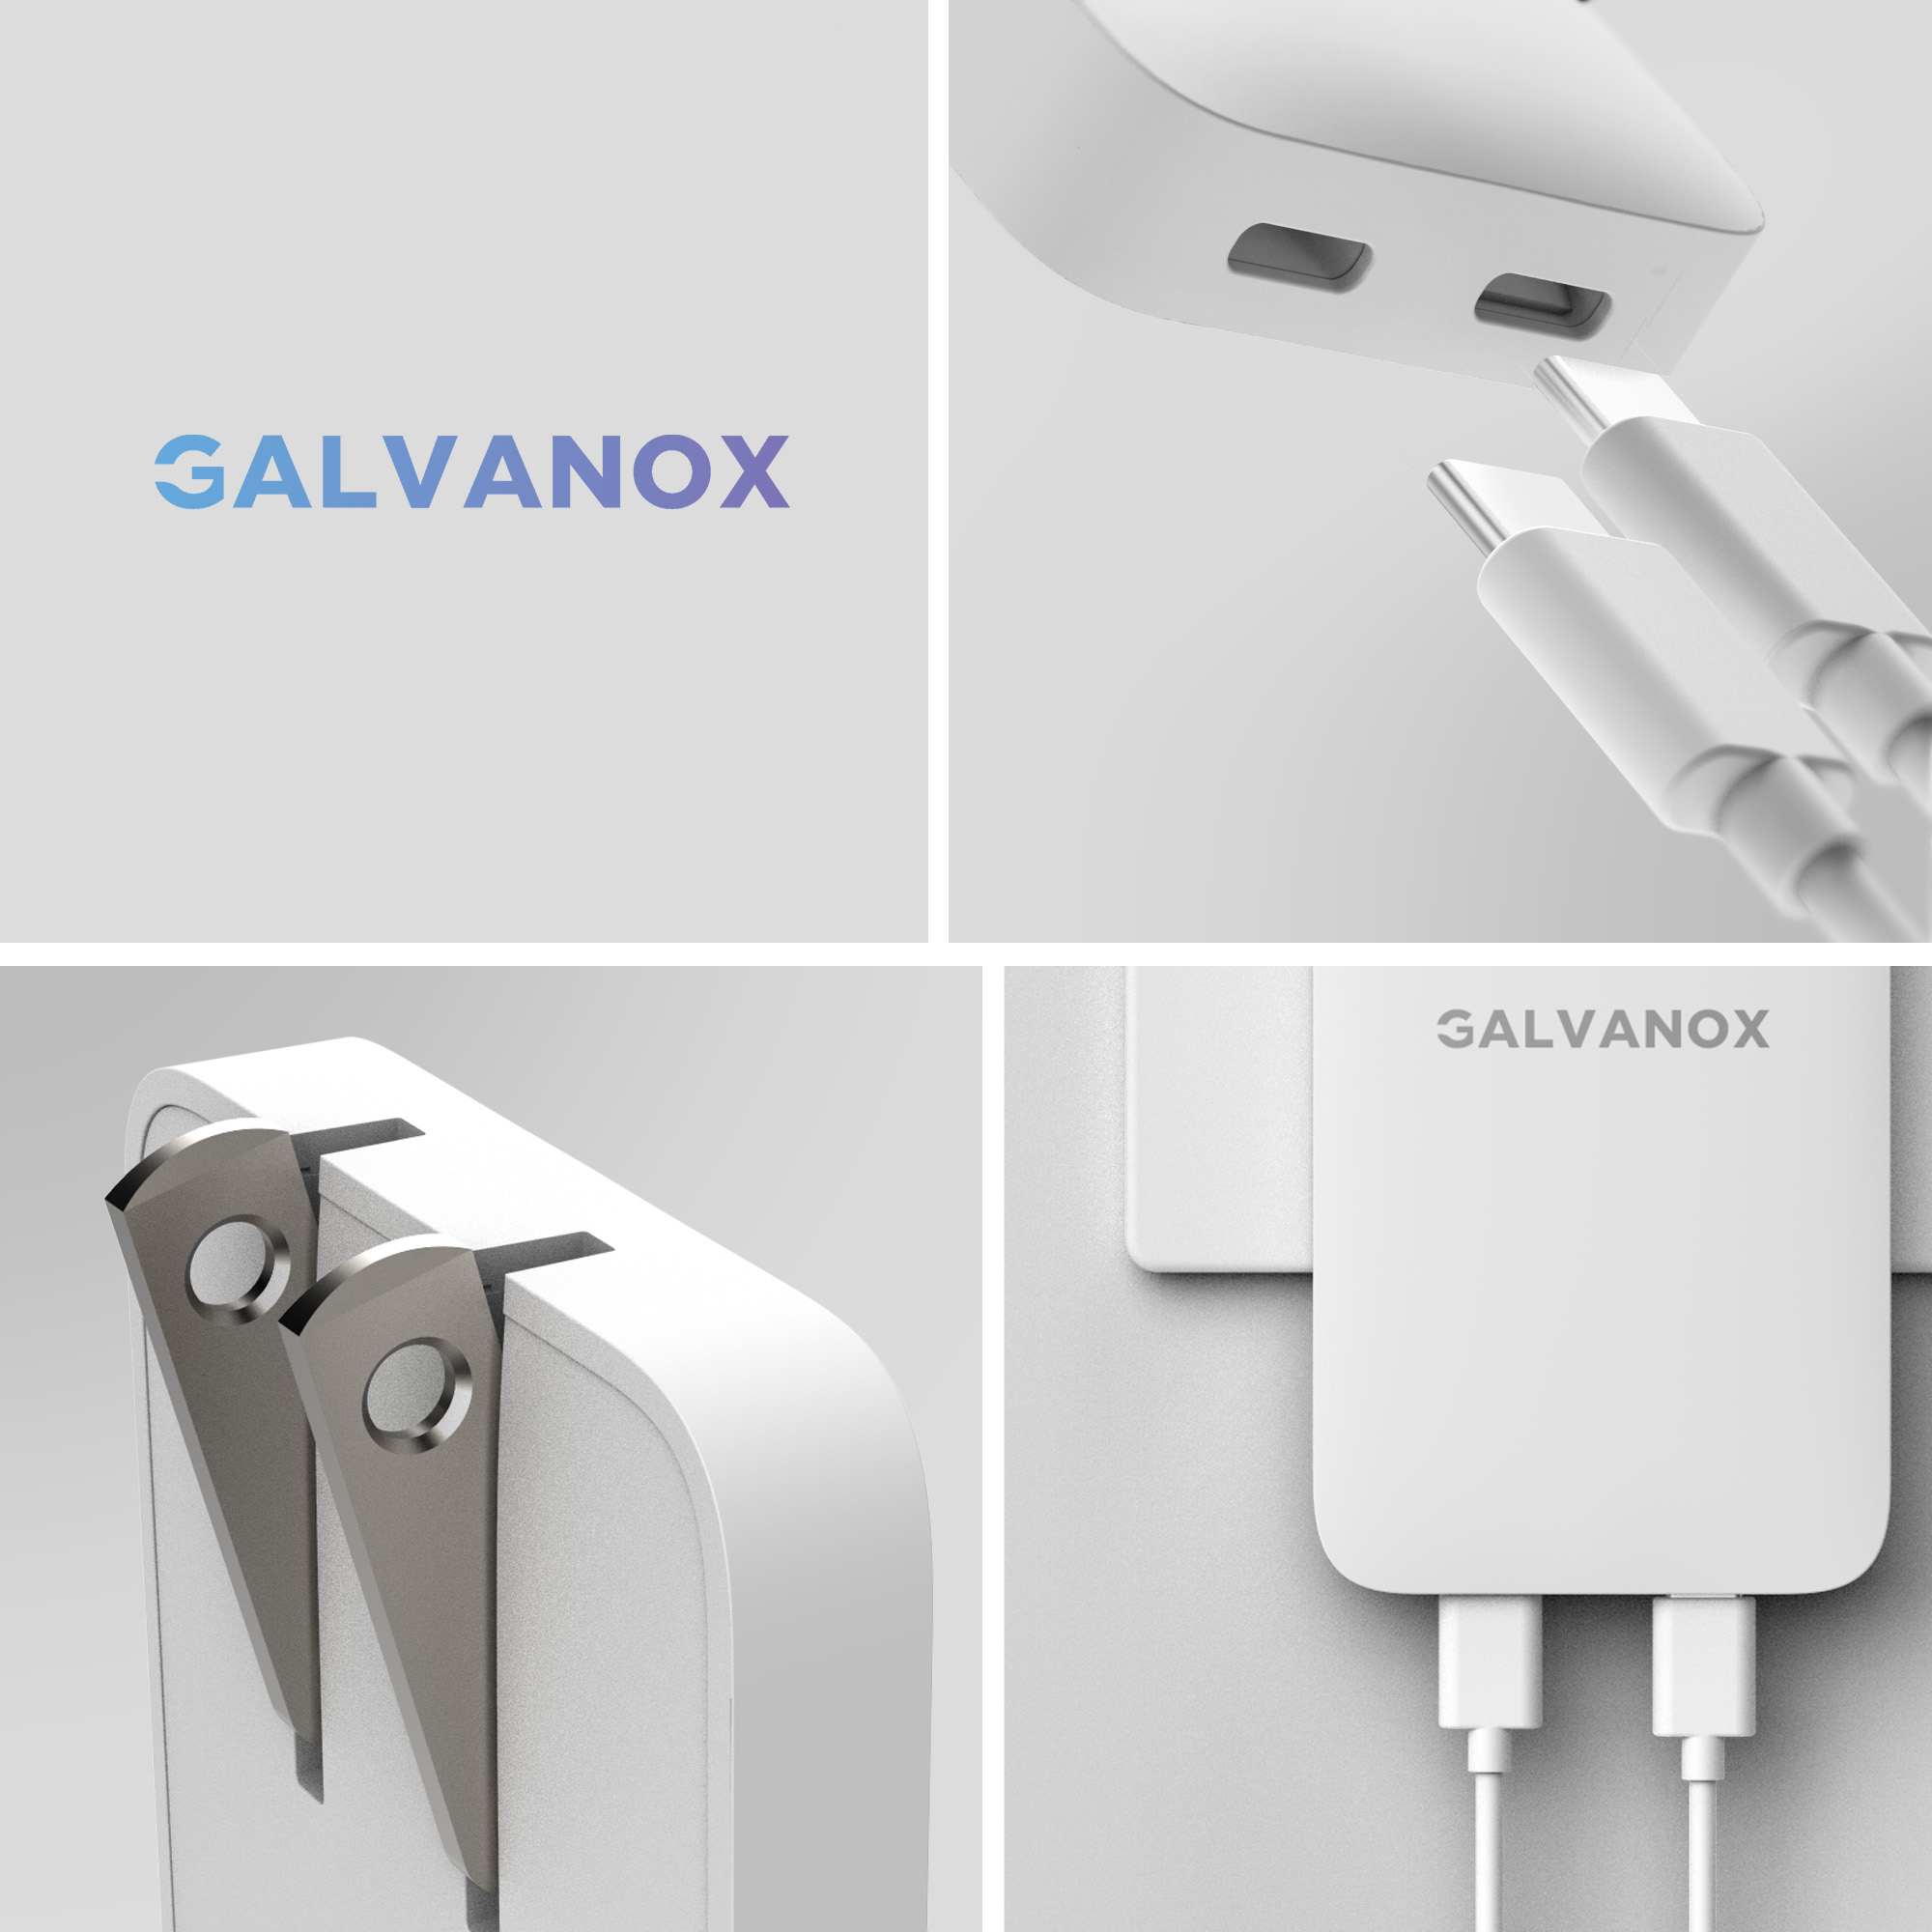 Galvanox MagSafe Powerbank with USB-C Cable in White - Encased